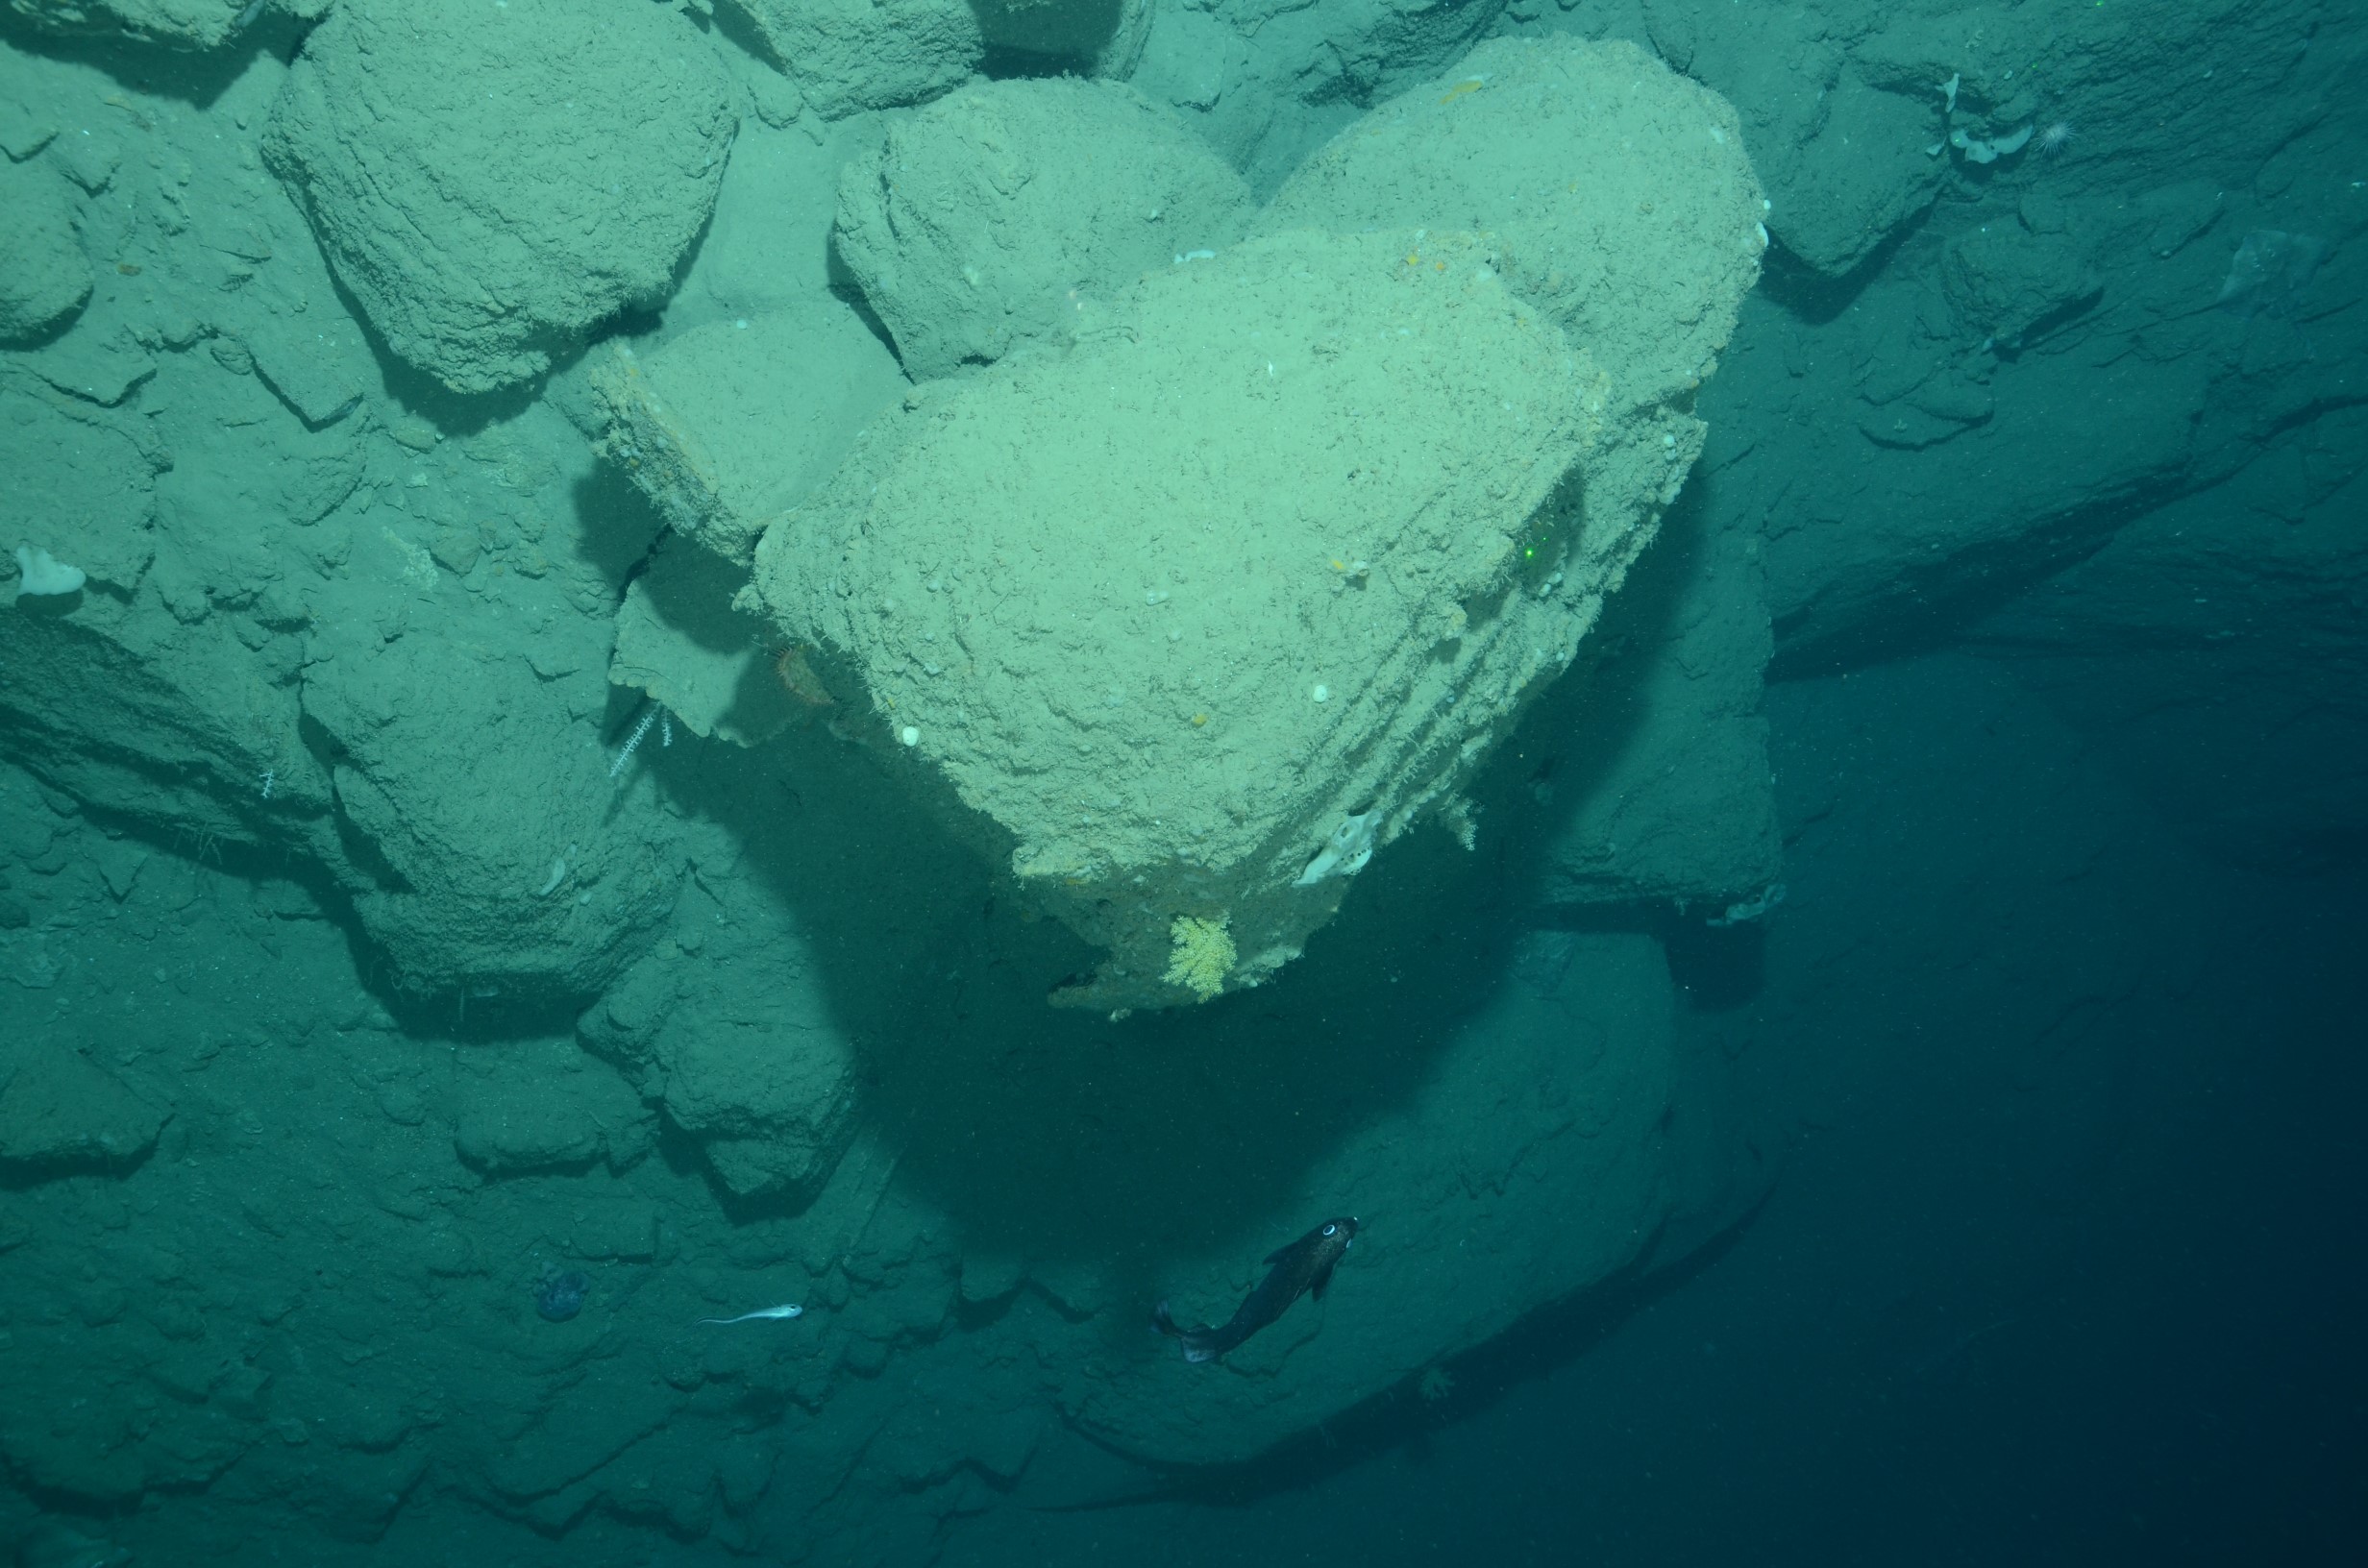 Large boulders create habitat for acanthagorgia and bamboo corals, white sponges, urchins and octopus in Lindenkohl Canyon